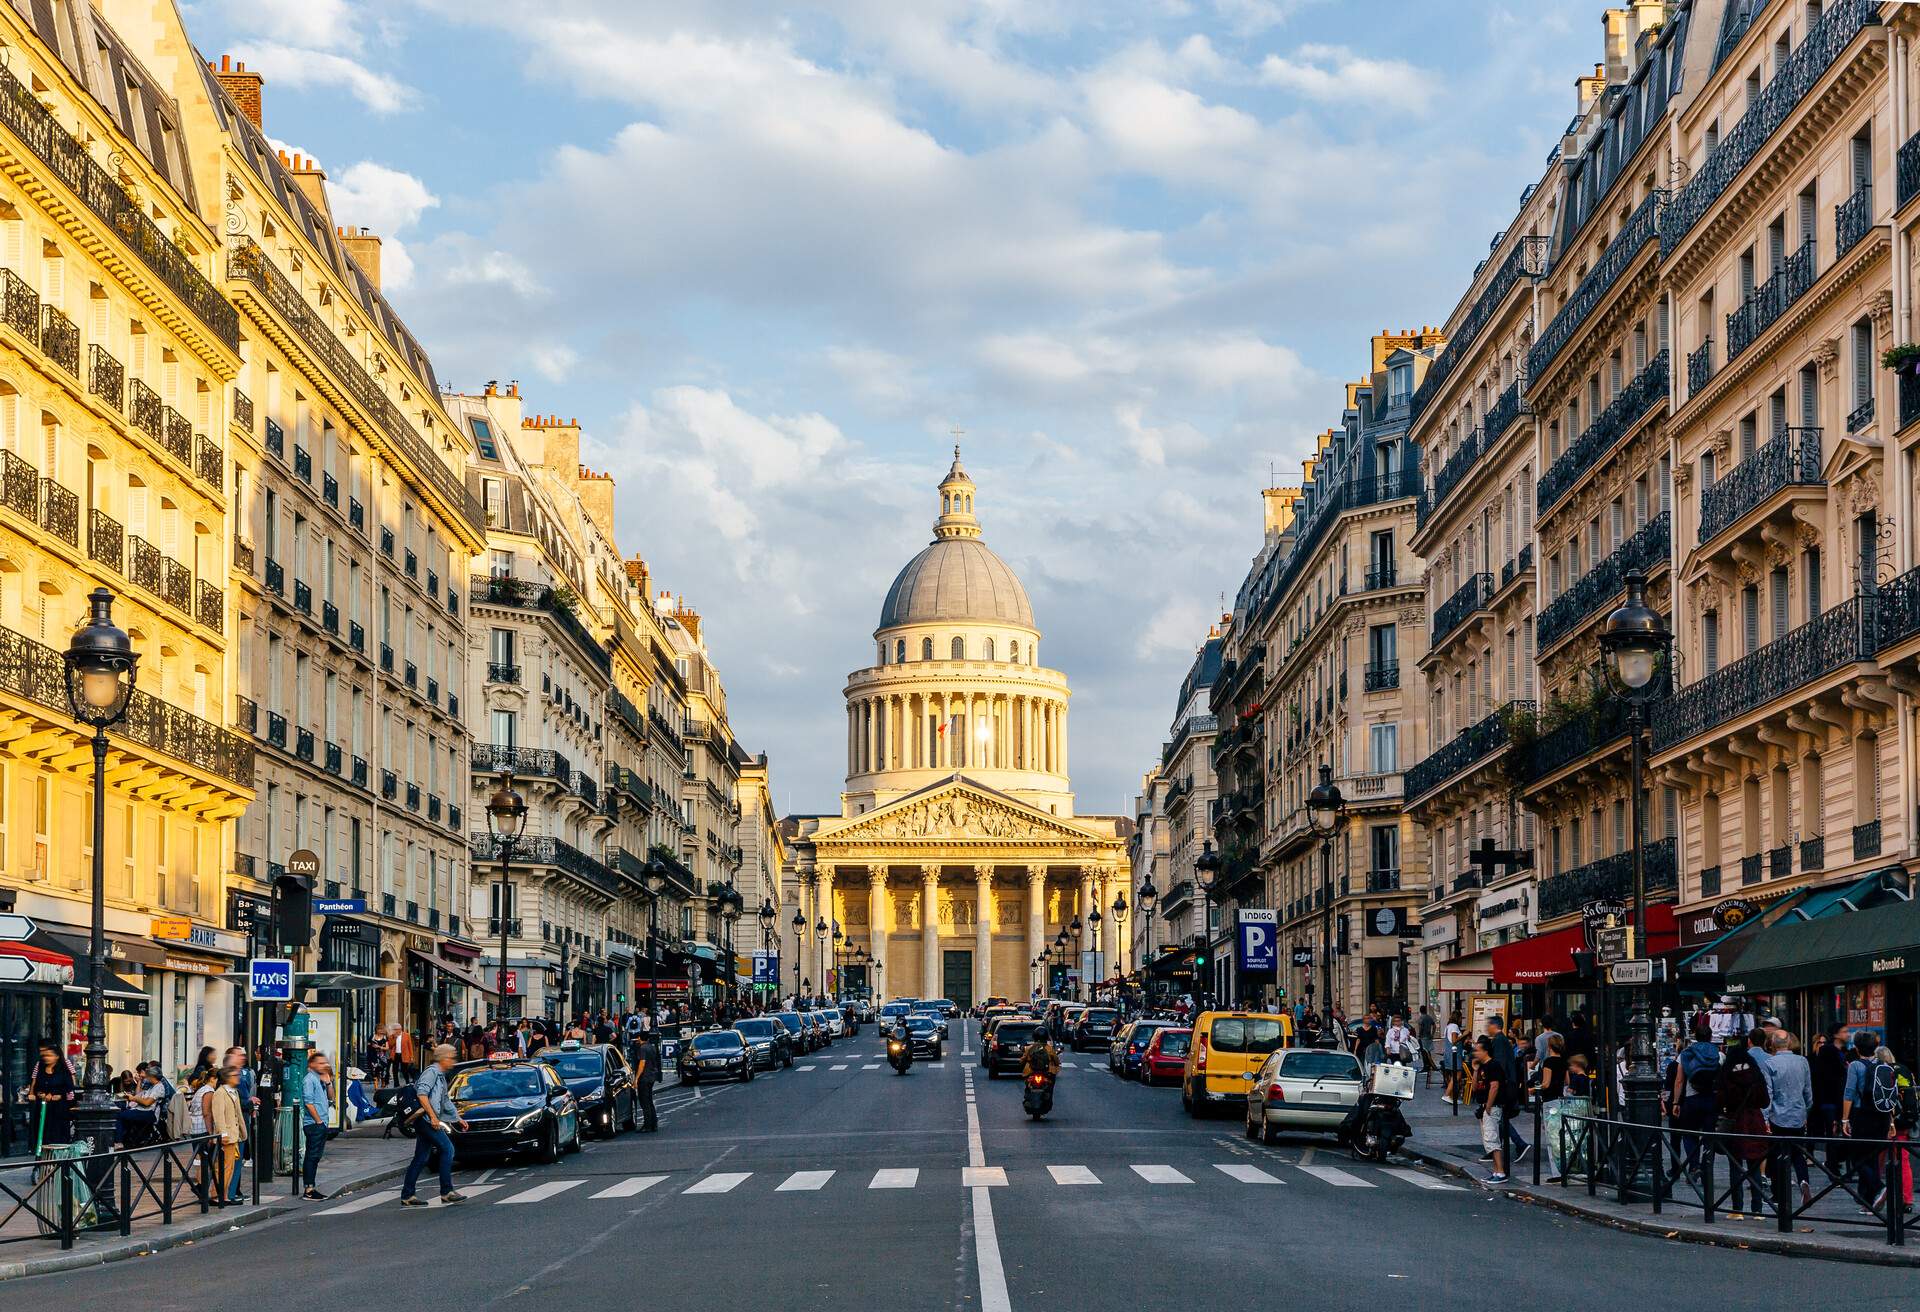 A bustling city street with the Place du Panthéon in the background.